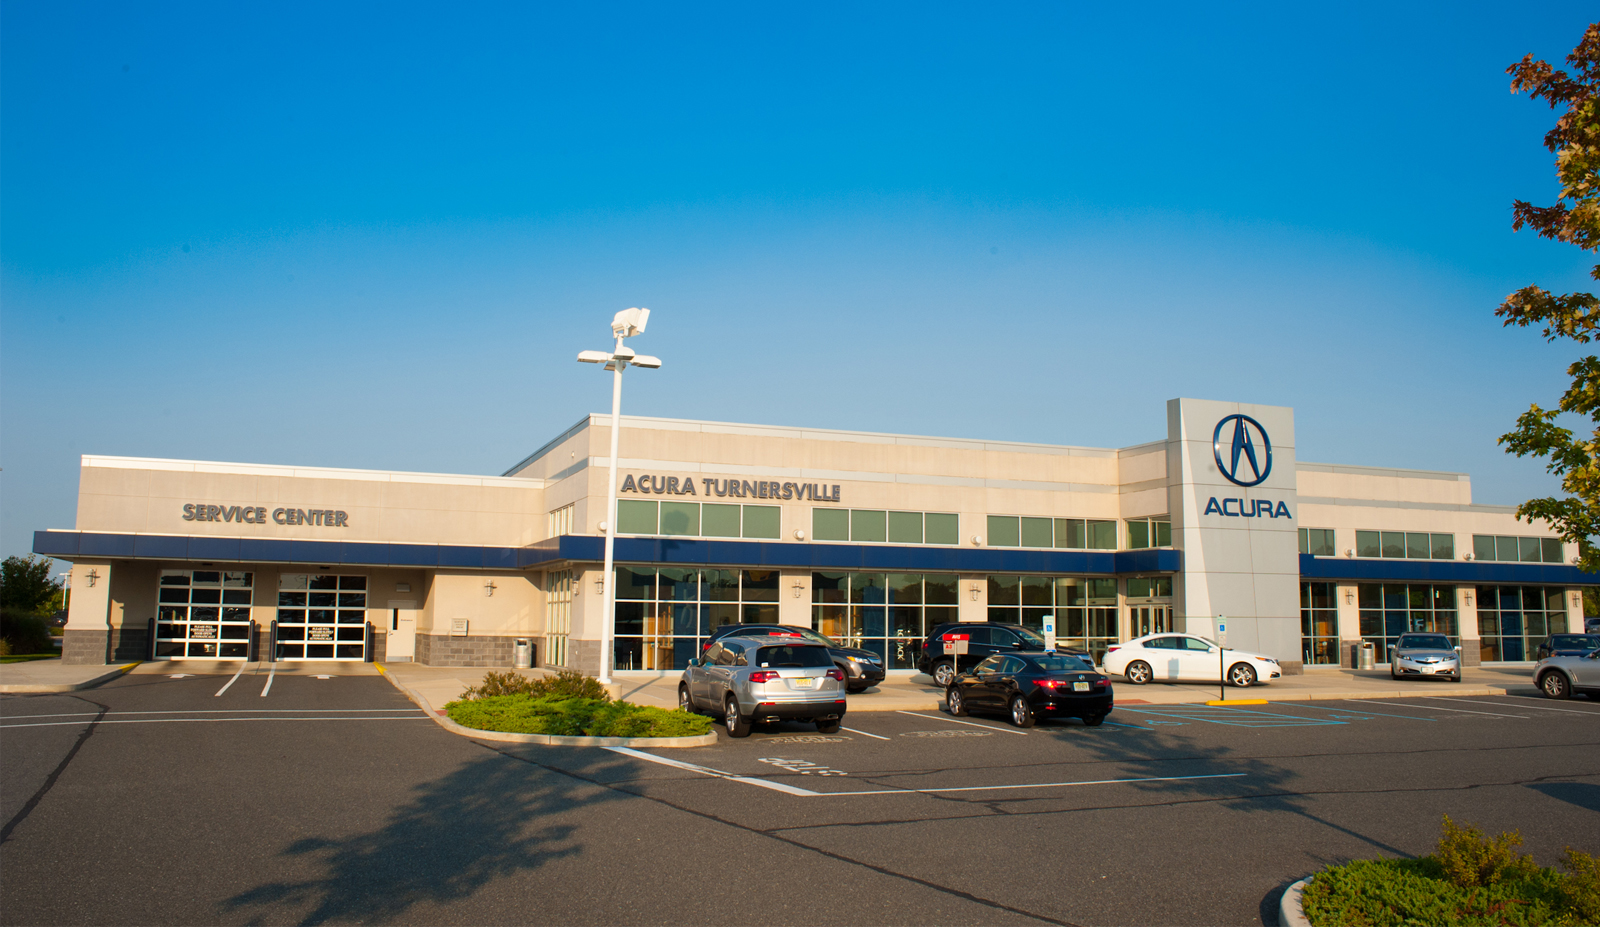 Acura Turnersville Service and Parts